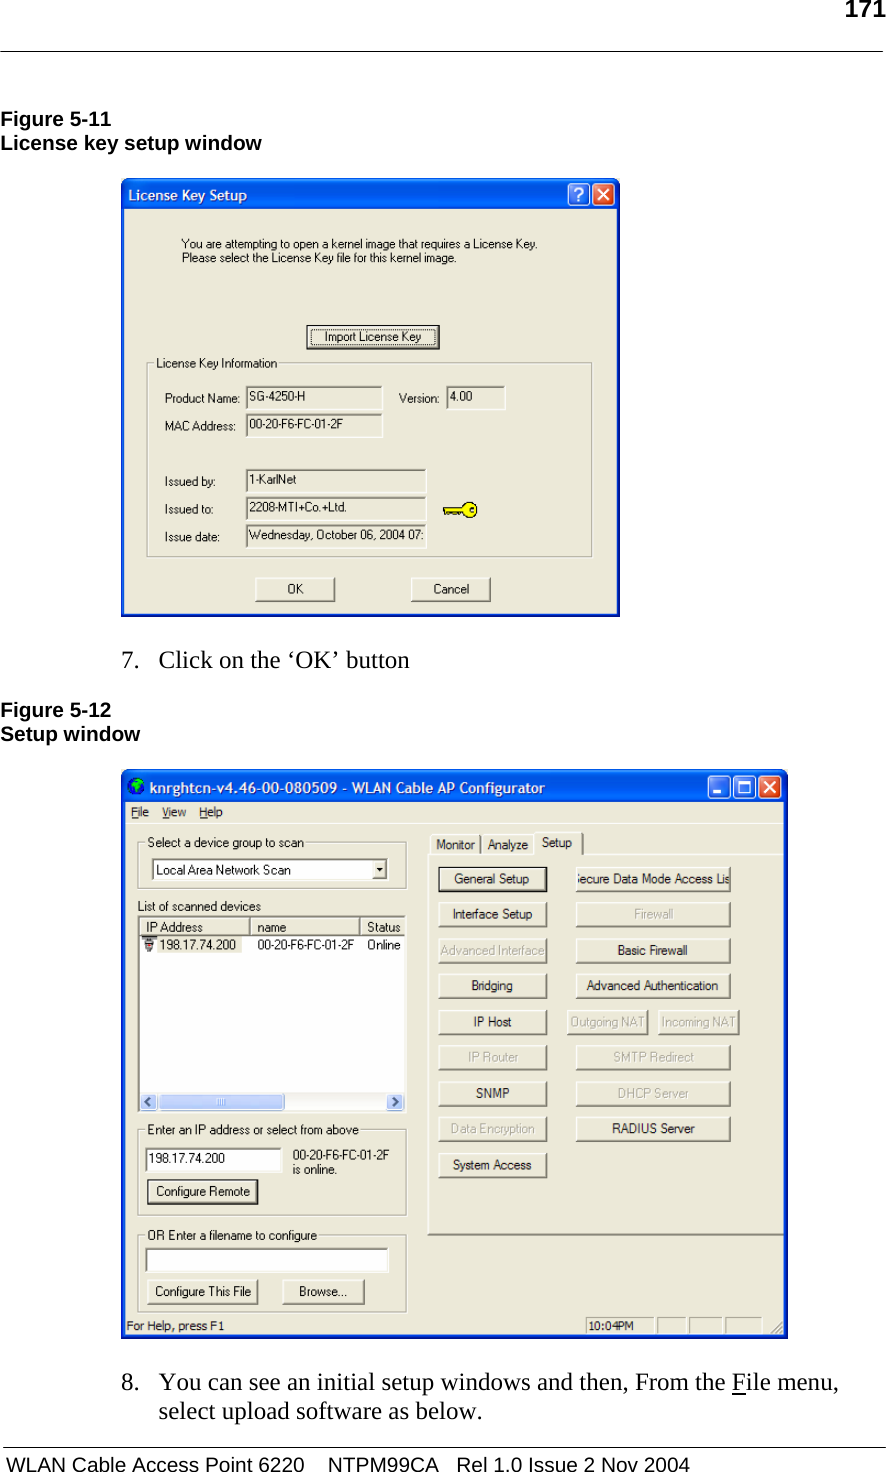   171   WLAN Cable Access Point 6220    NTPM99CA   Rel 1.0 Issue 2 Nov 2004 Figure 5-11 License key setup window    7. Click on the ‘OK’ button   Figure 5-12 Setup window    8. You can see an initial setup windows and then, From the File menu, select upload software as below. 